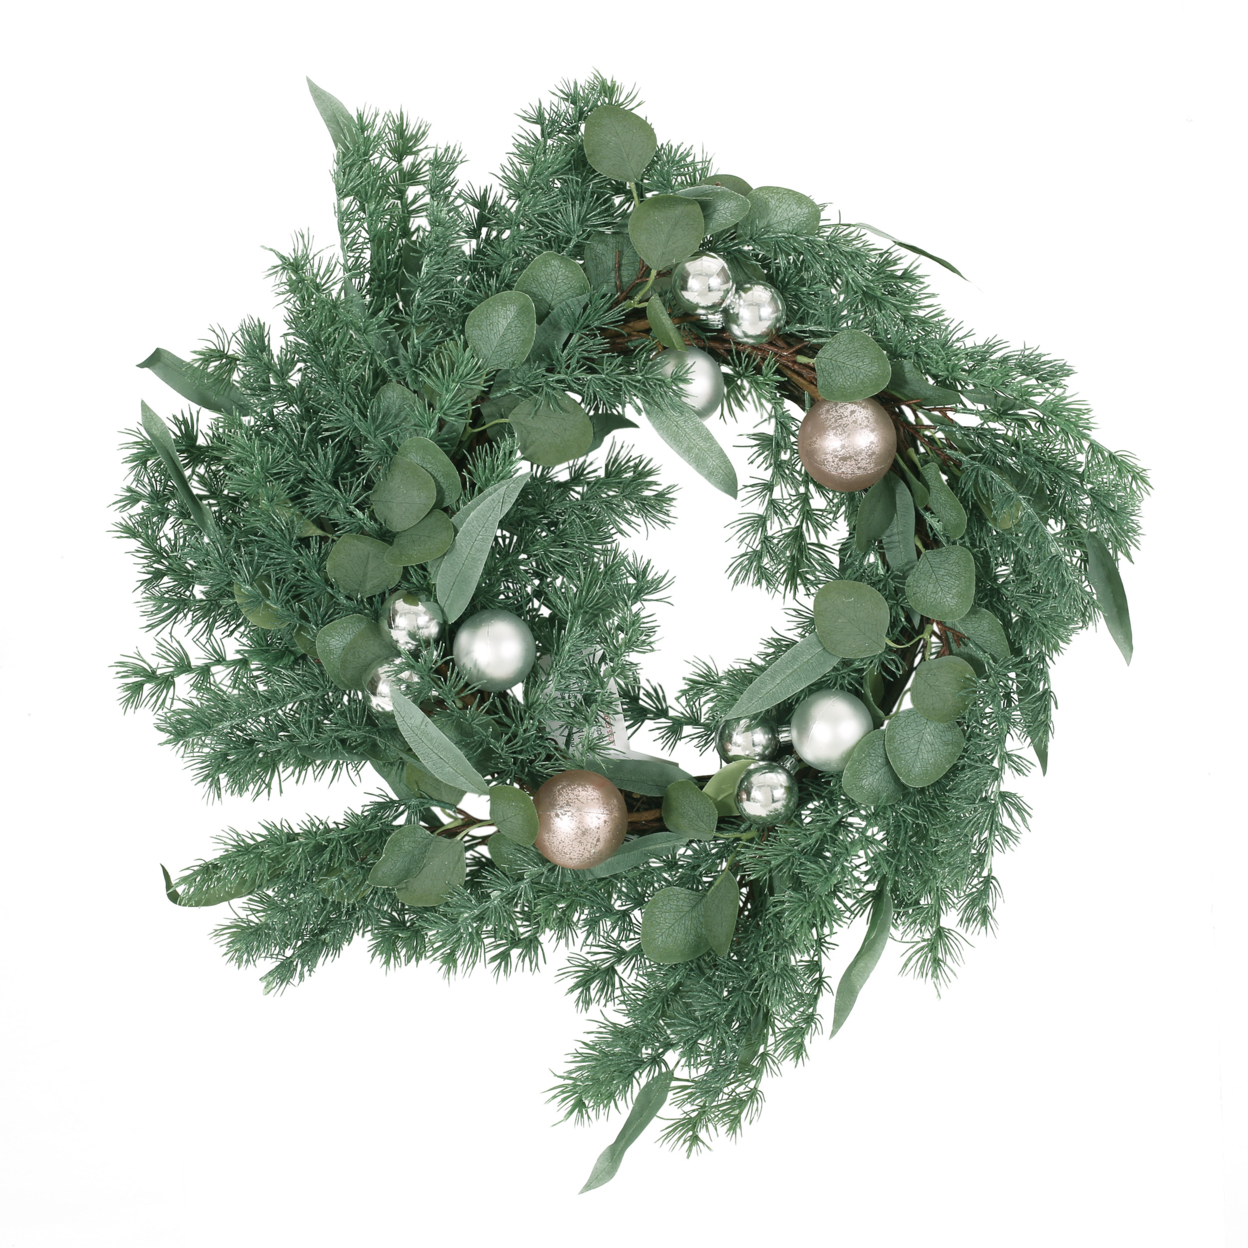 Parandes 26 Pine Artificial Wreath With Ornaments, Green